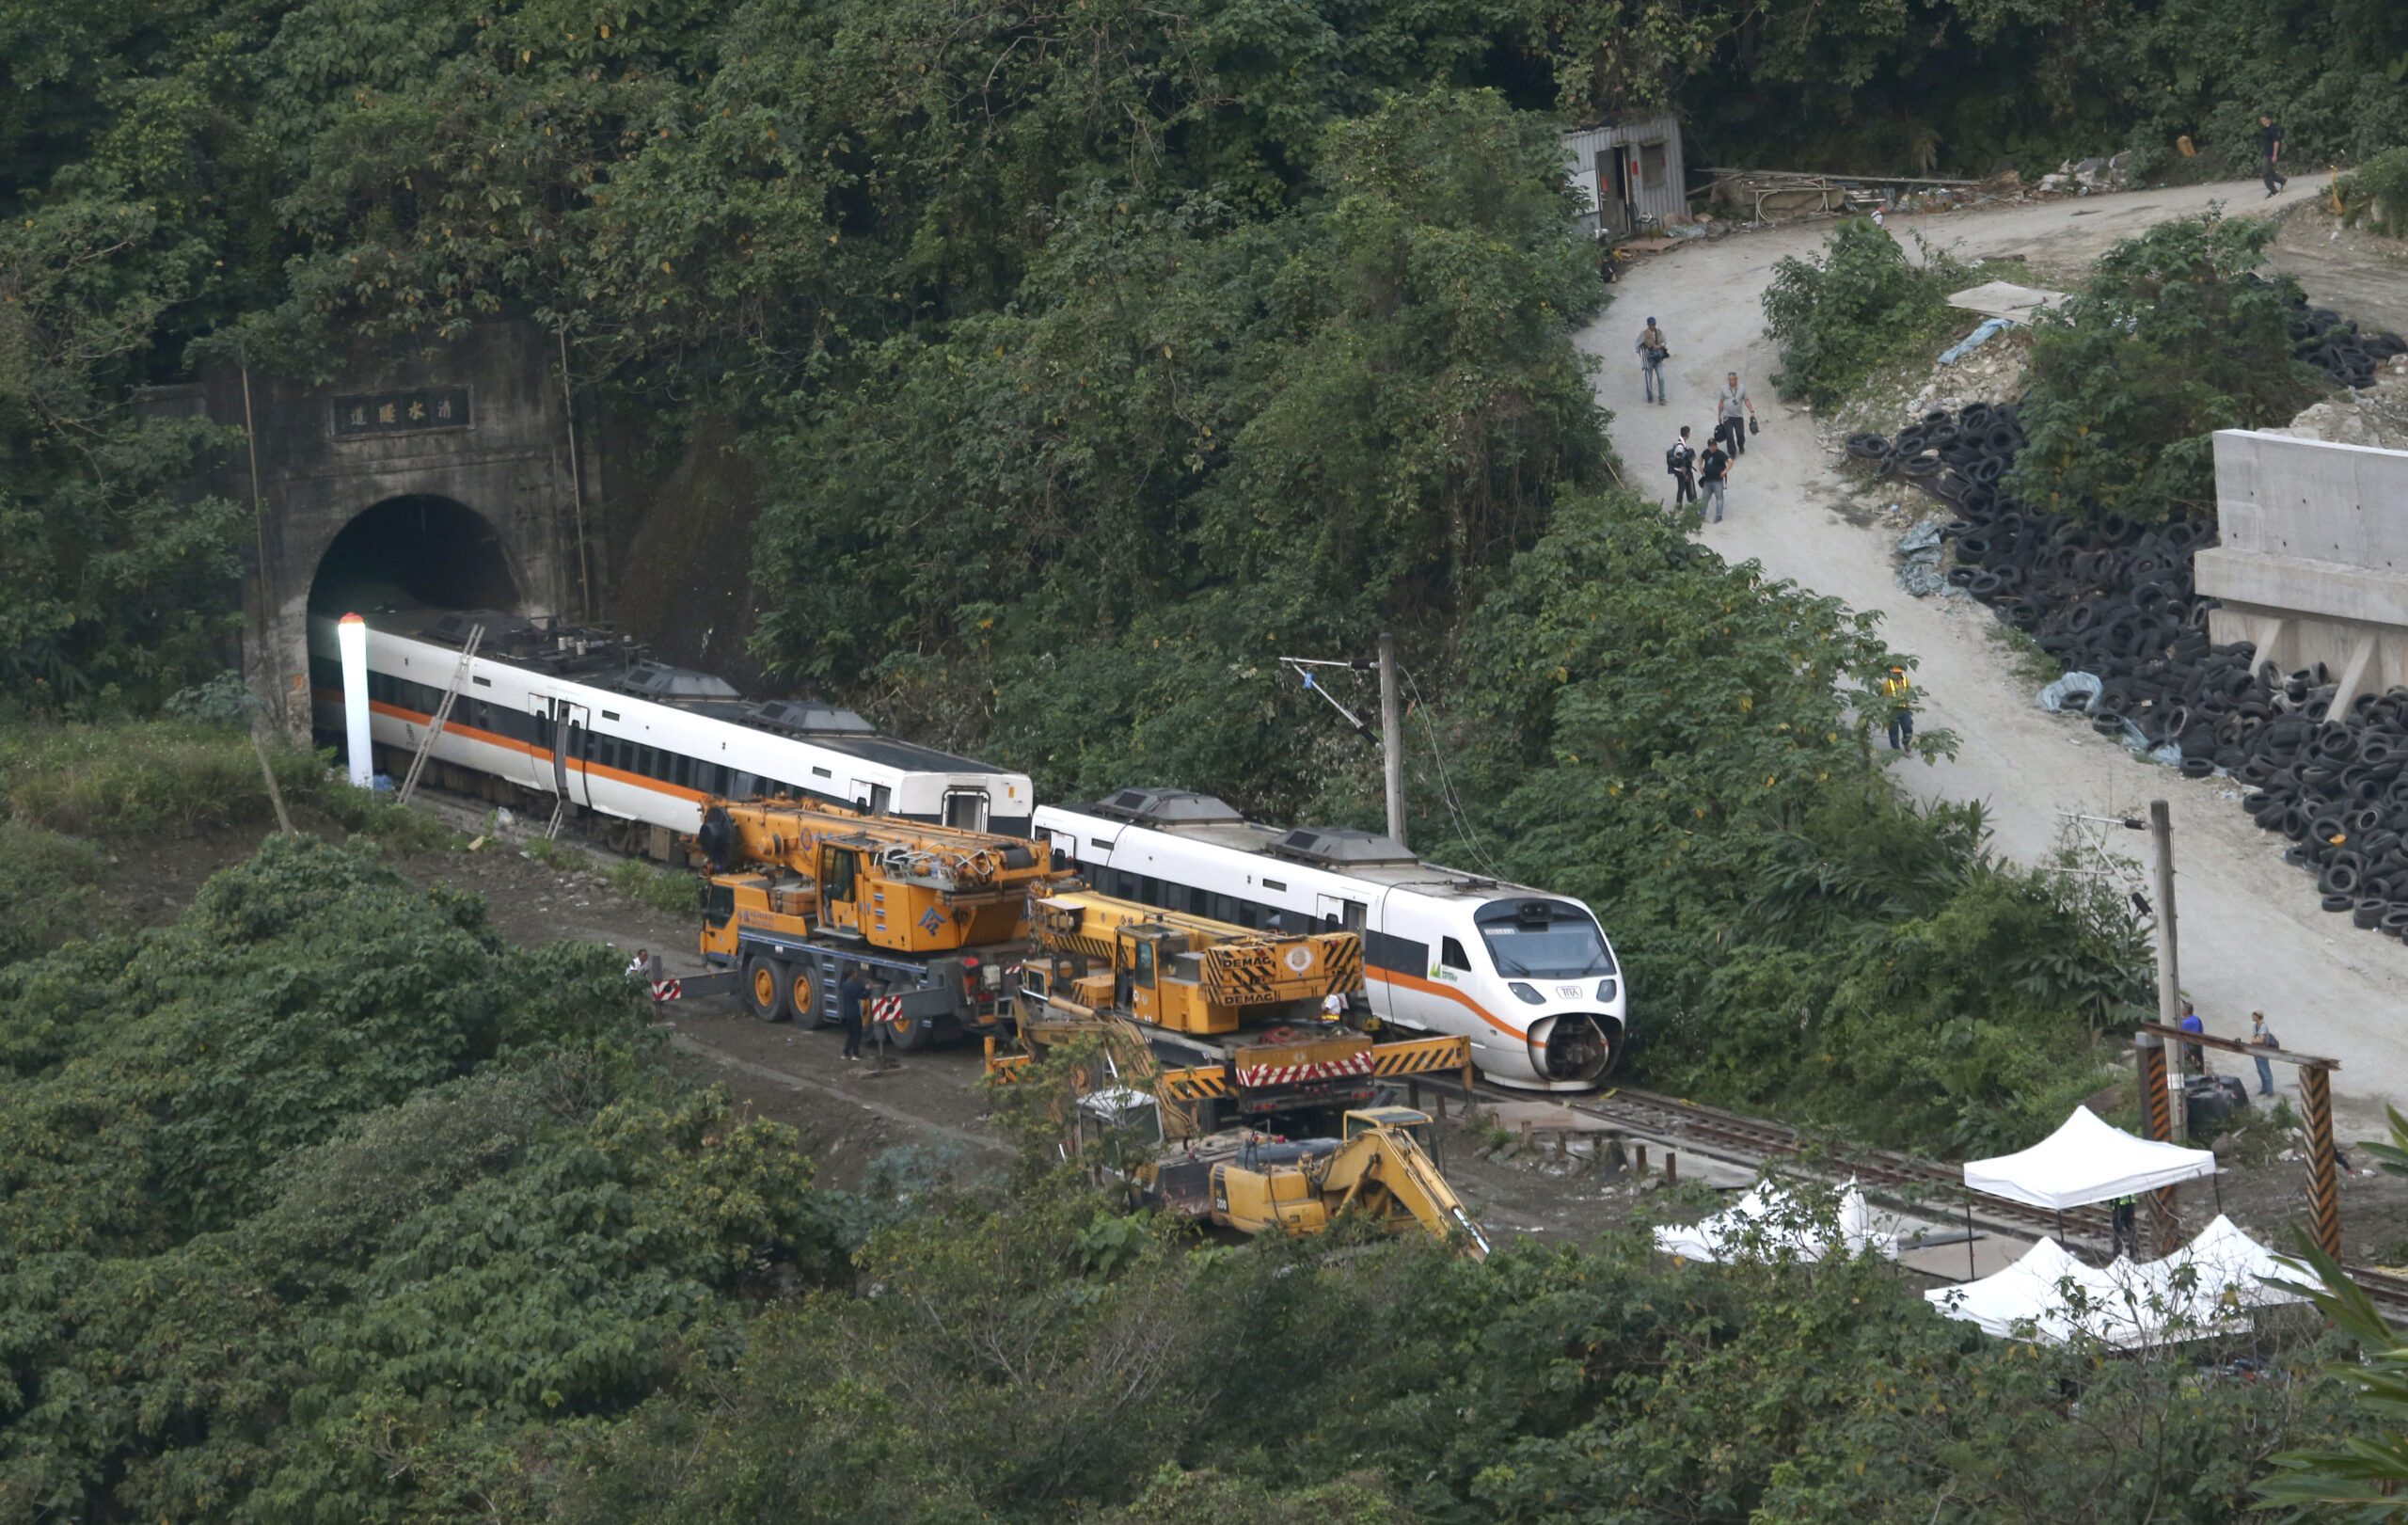 Rescue workers remove a part of the derailed train near Taroko Gorge in Hualien, Taiwan on Saturday, April 3, 2021. Photo: Chiang Ying-ying / AP